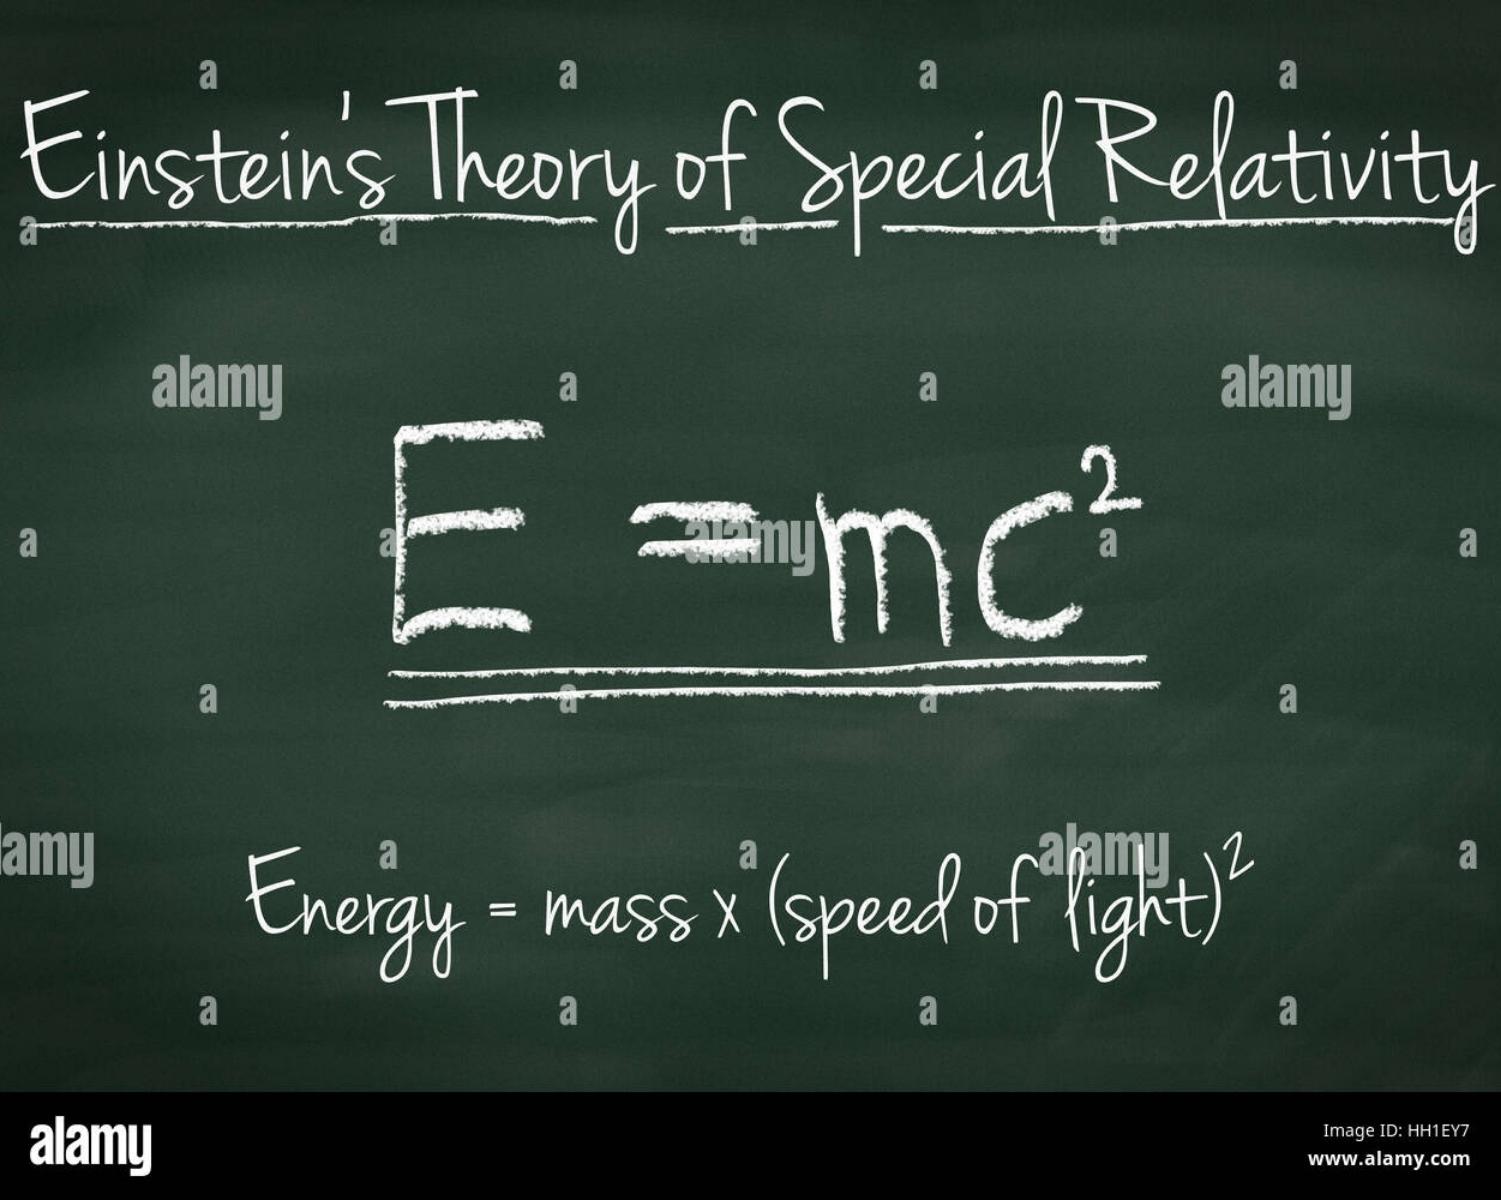 What is special relativity?